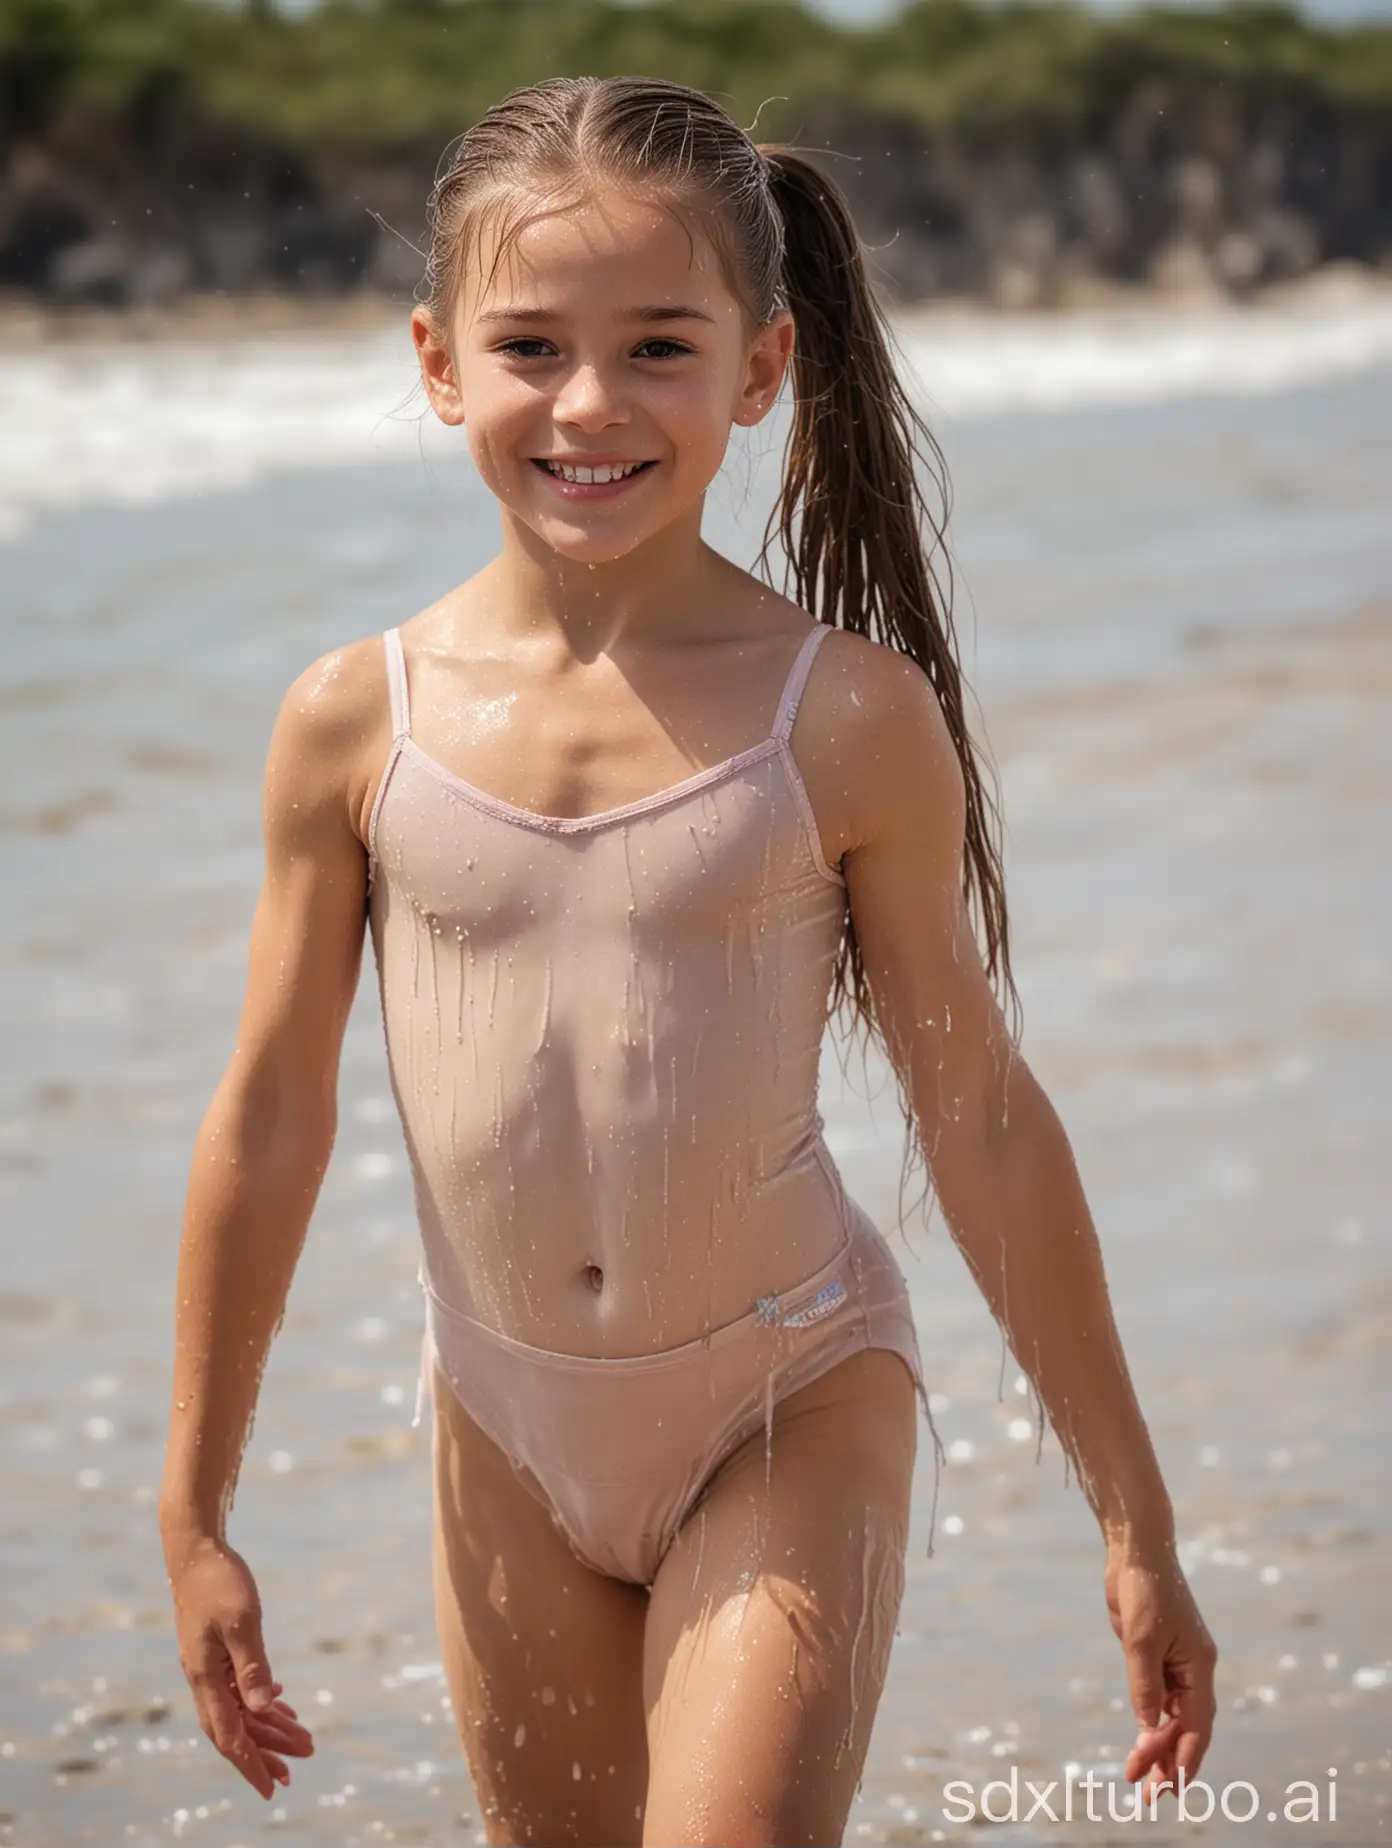 8 year old ballet dancer girl, long hair in a ponytail, extremely muscular, topless, smiling, at the beach, wet